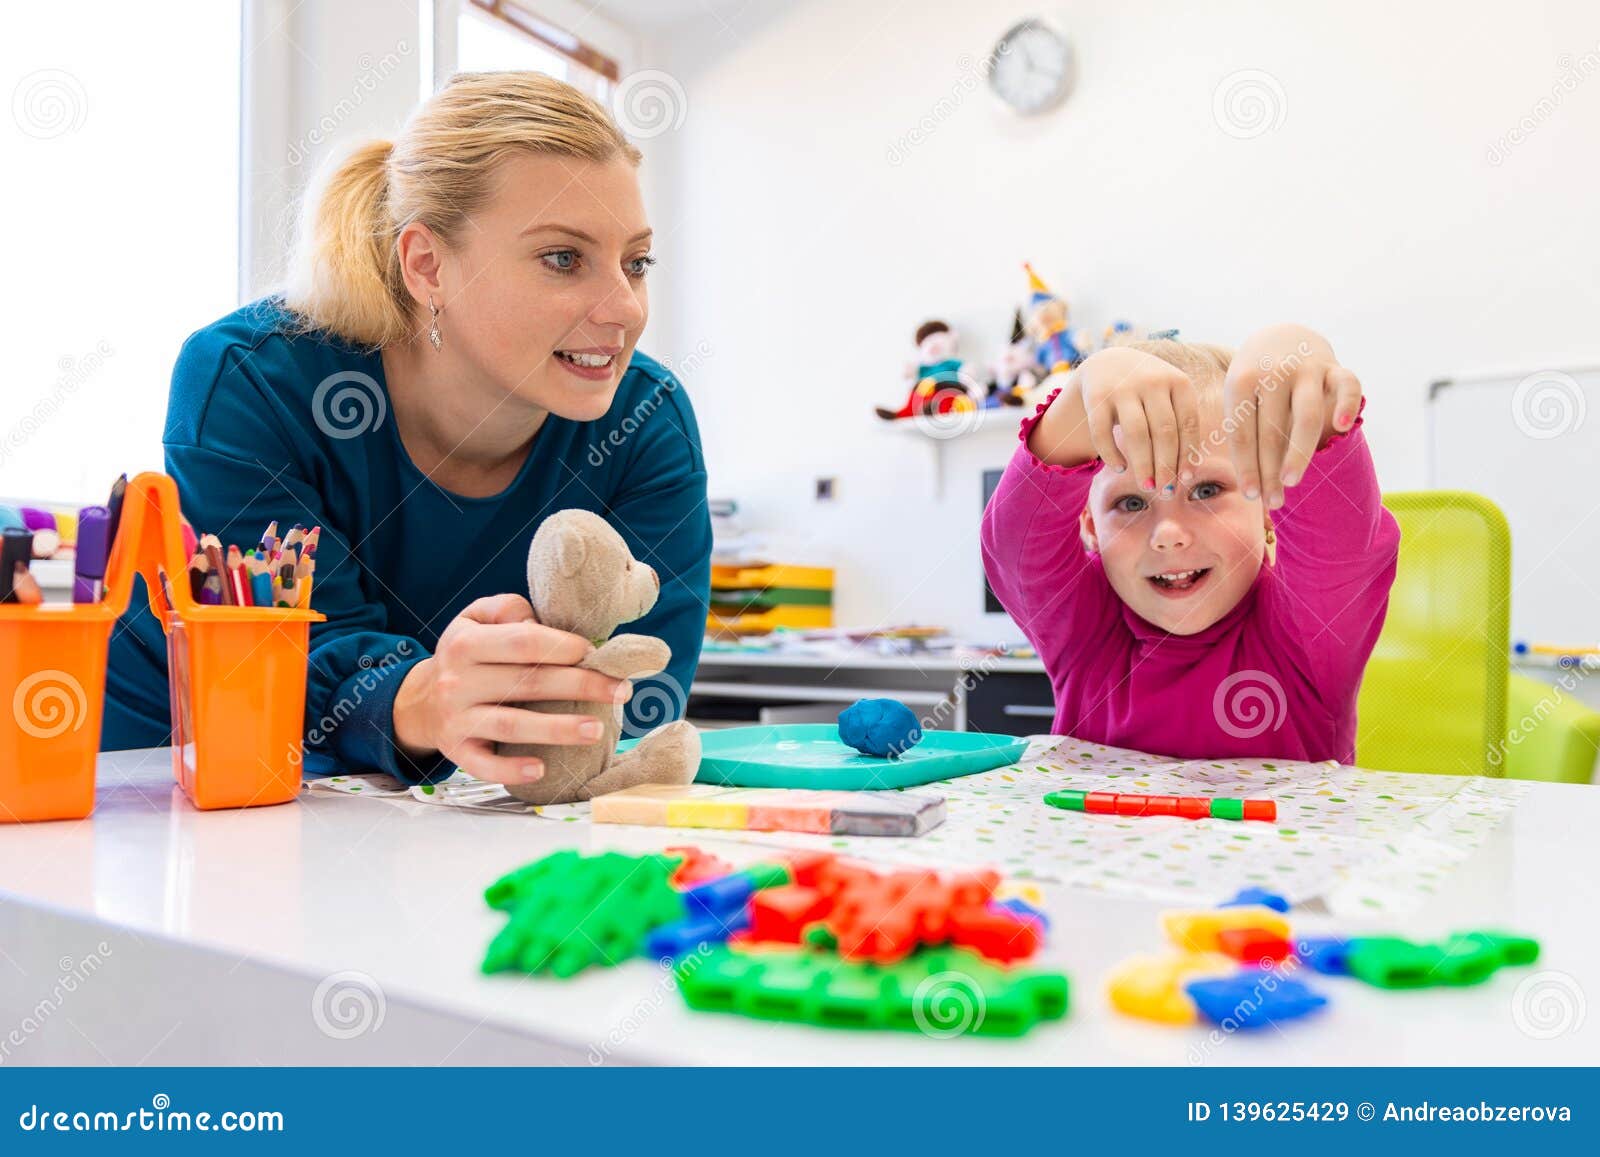 toddler girl in child occupational therapy session doing sensory playful exercises with her therapist.